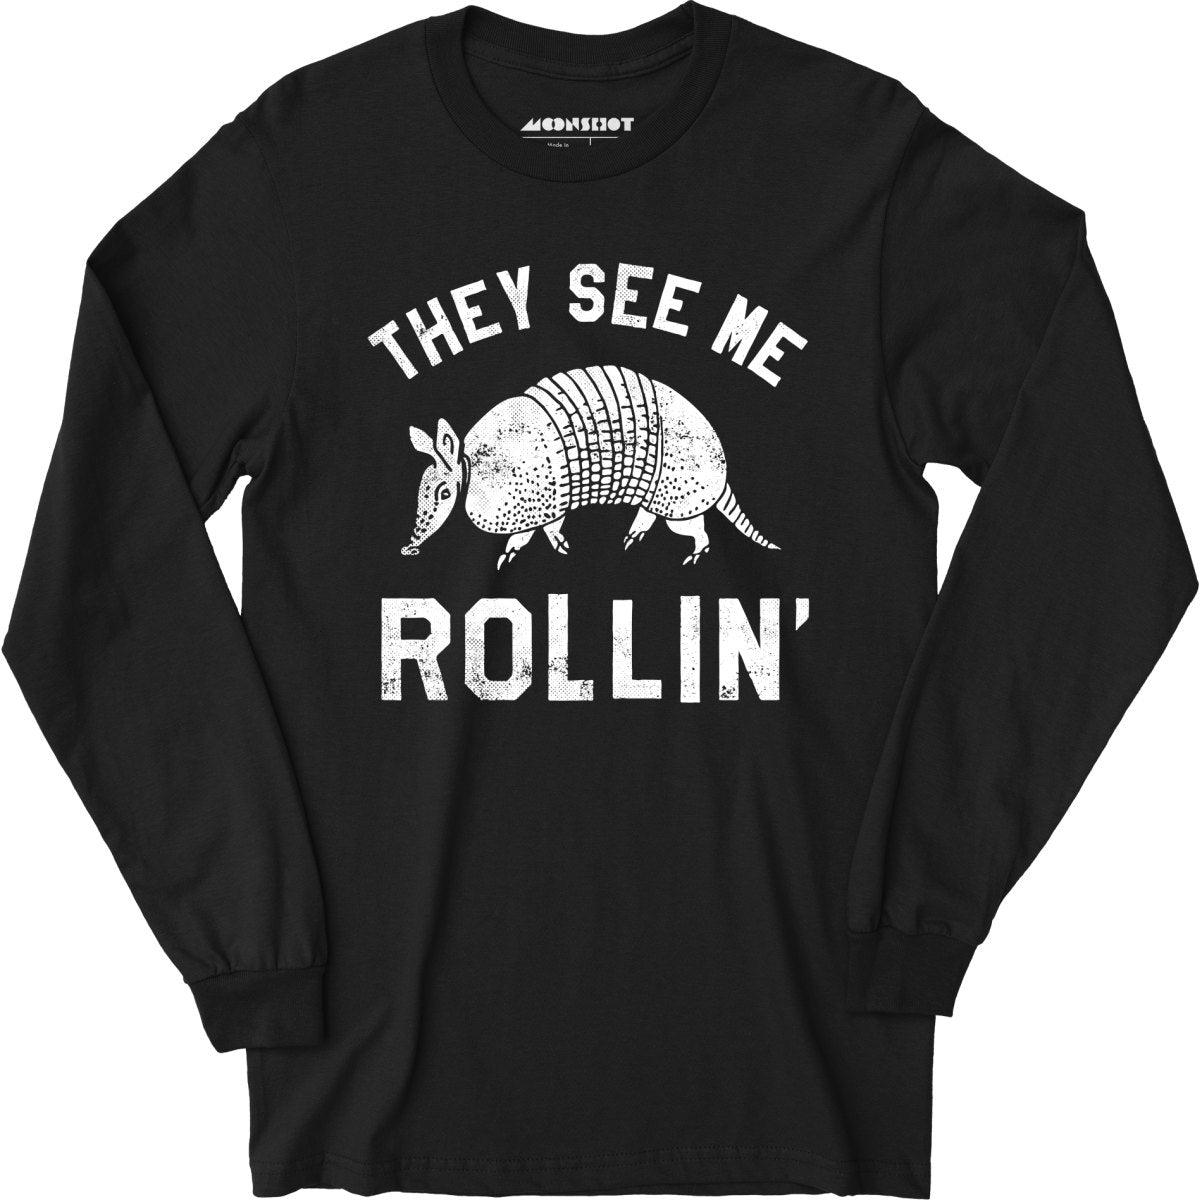 They See Me Rollin' - Long Sleeve T-Shirt